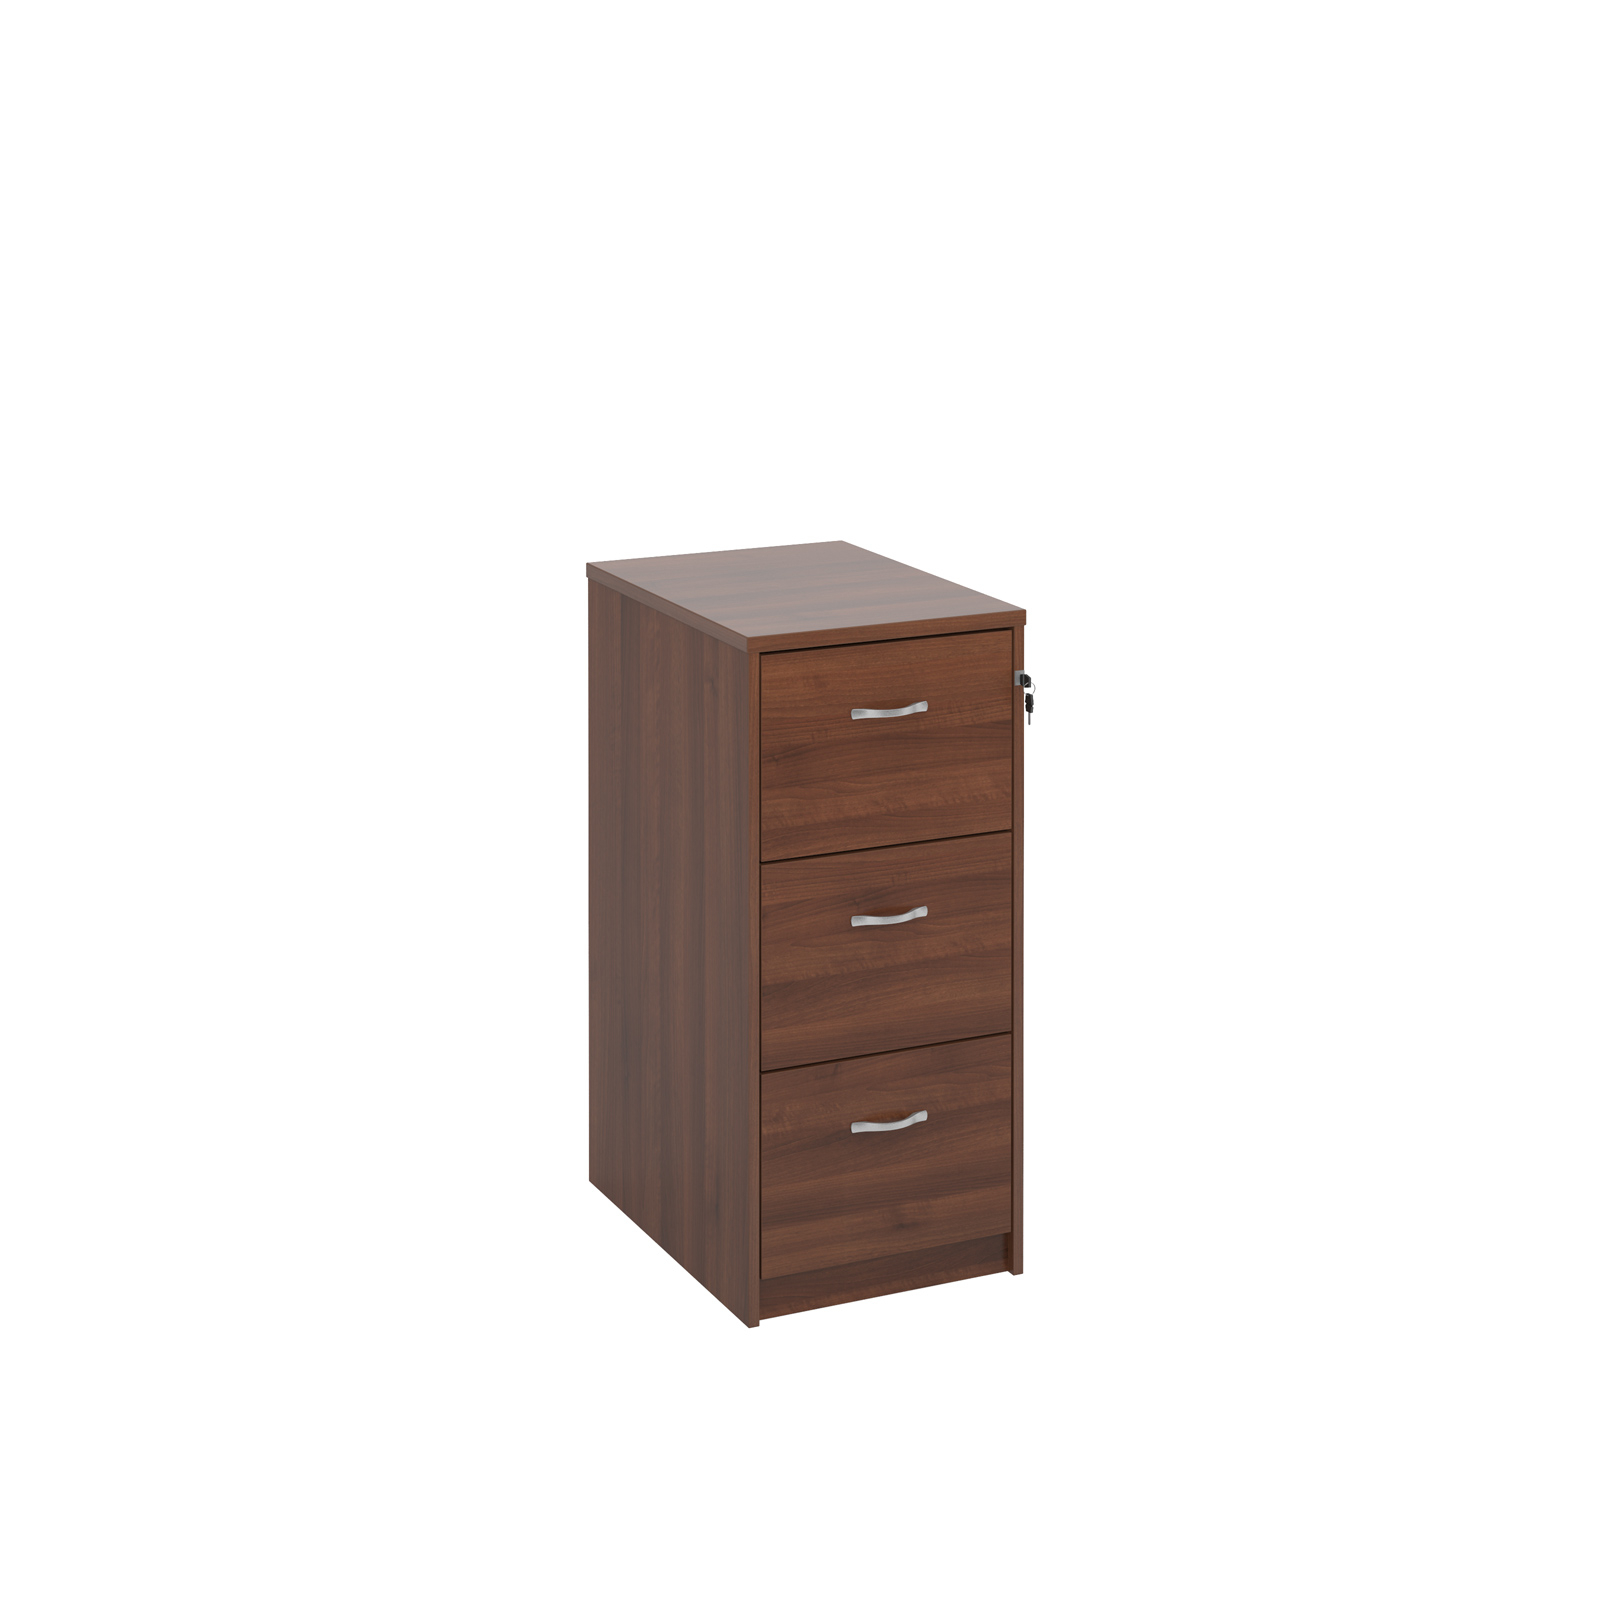 Dams 3 Drawer Wooden Filing Cabinet With Chrome Handles Walnut in dimensions 1600 X 1600